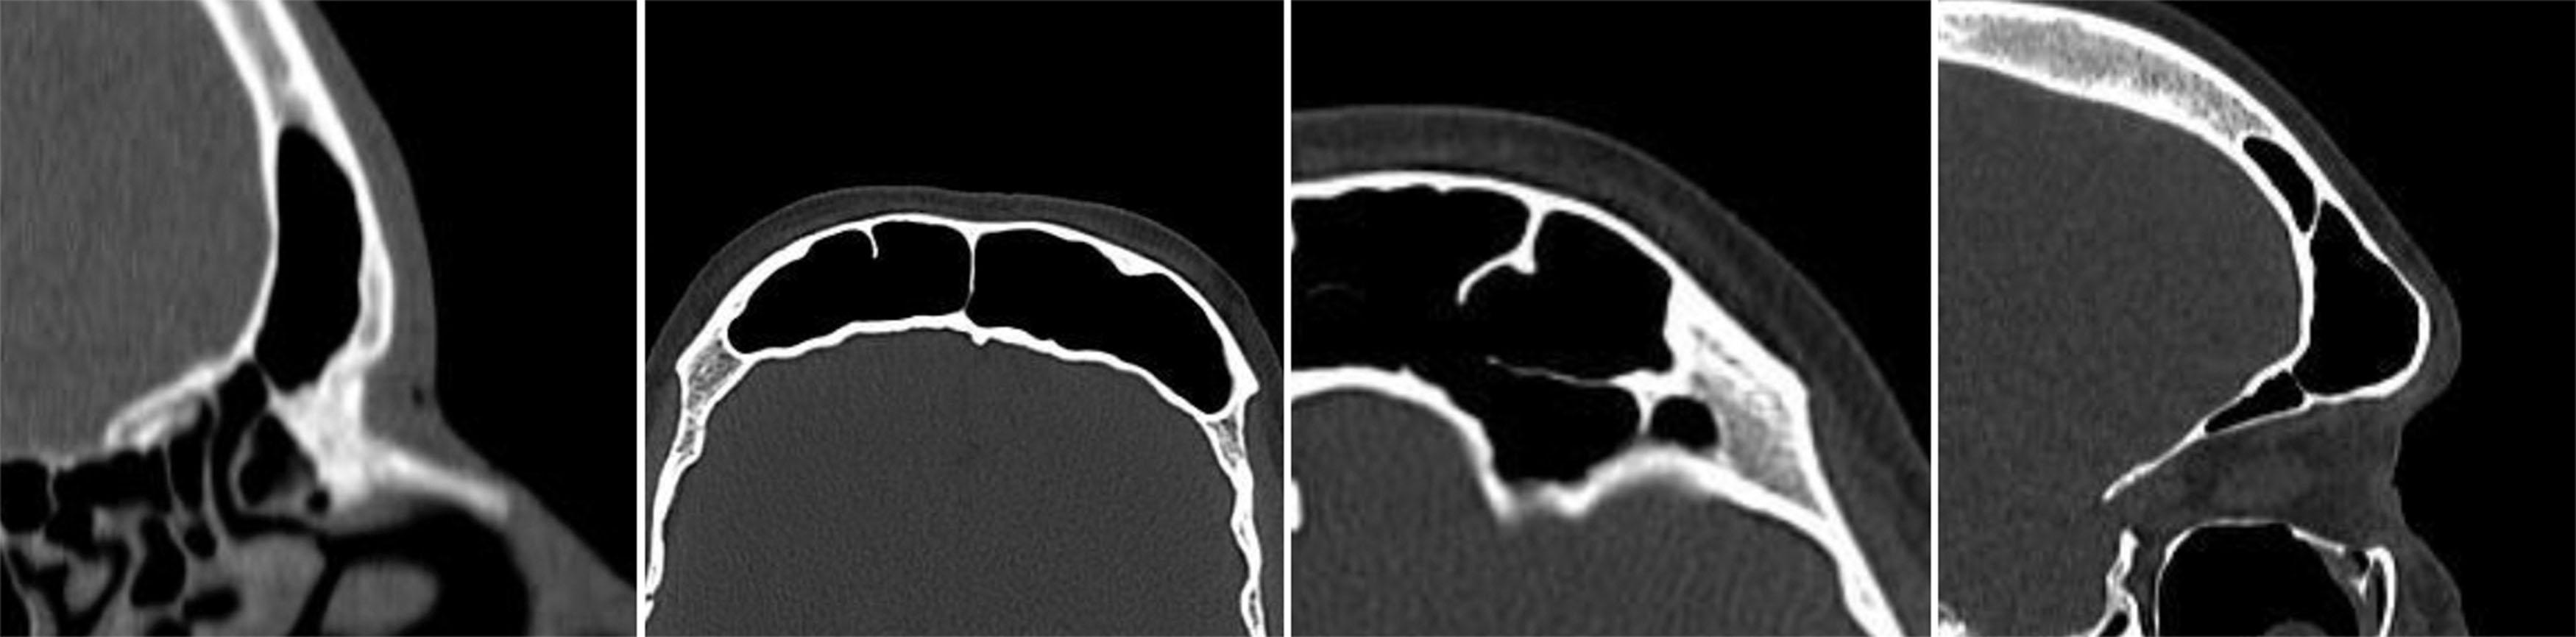 Figure 17.20, Characteristics of the sinus to consider before doing an osteotomy of the anterior wall of the frontal sinus. From left to right: thickness of the anterior wall of the frontal sinus, sinus volume, extension of the sinus towards the lateral areas and orbital ceiling, and sinus projection. To a large extent, these characteristics determine whether the subsequent reconstruction will be simple (screws and titanium plates) or complex (screws and titanium mesh).